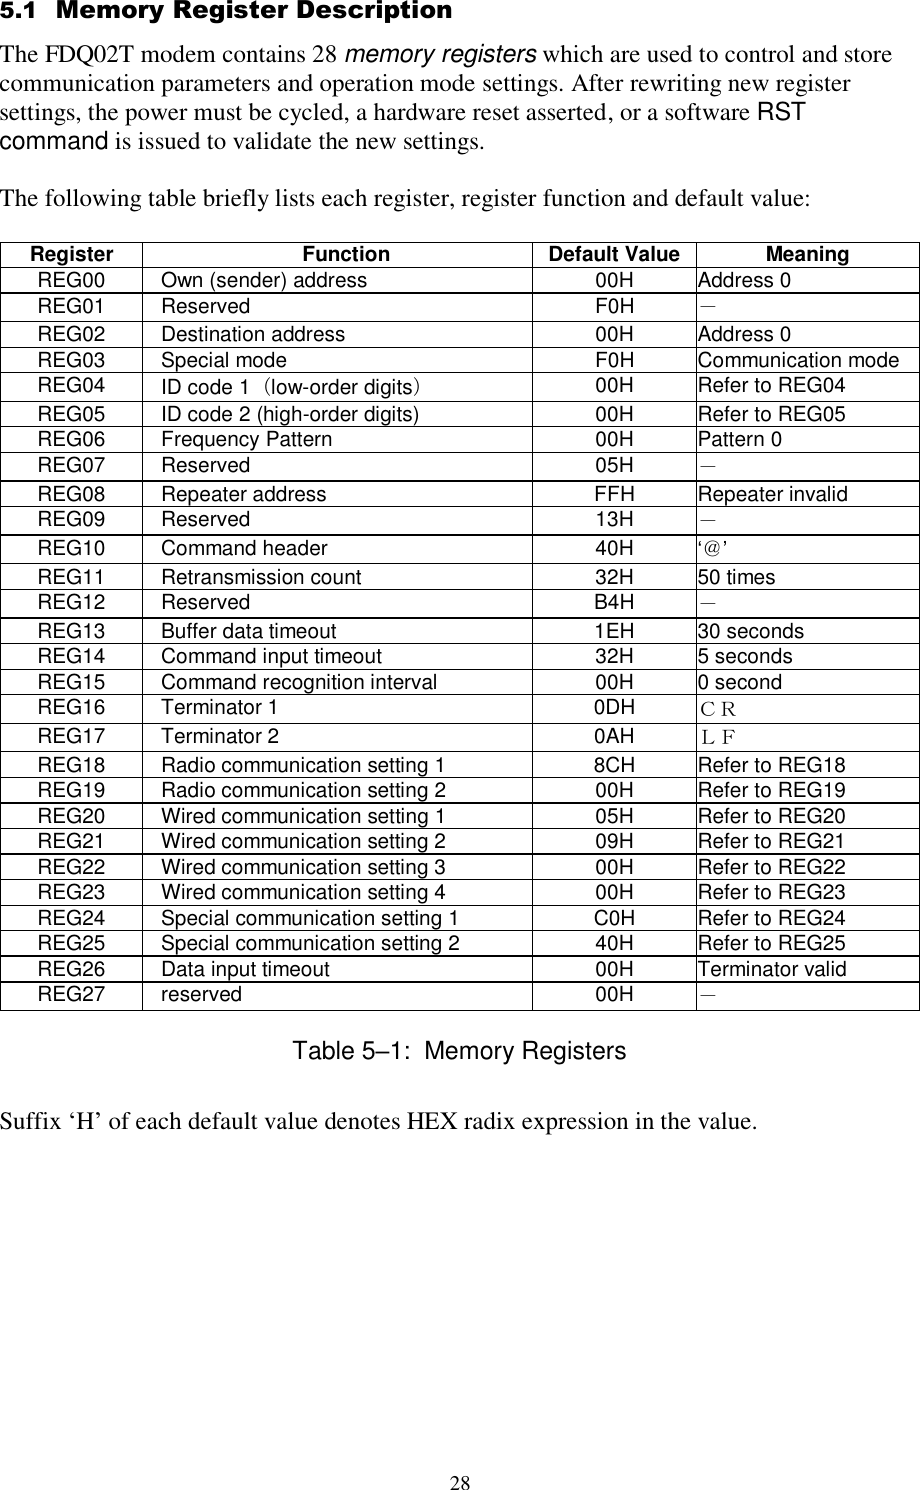  28  5.1  Memory Register Description The FDQ02T modem contains 28 memory registers which are used to control and store communication parameters and operation mode settings. After rewriting new register settings, the power must be cycled, a hardware reset asserted, or a software RST command is issued to validate the new settings.  The following table briefly lists each register, register function and default value:  Register  Function Default Value Meaning REG00  Own (sender) address 00H Address 0 REG01  Reserved F0H － REG02  Destination address 00H Address 0 REG03  Special mode F0H Communication mode REG04  ID code 1（low-order digits） 00H Refer to REG04 REG05  ID code 2 (high-order digits) 00H Refer to REG05 REG06  Frequency Pattern 00H Pattern 0 REG07  Reserved 05H － REG08  Repeater address FFH Repeater invalid REG09  Reserved 13H － REG10  Command header 40H ‘＠’ REG11  Retransmission count 32H 50 times REG12  Reserved  B4H － REG13  Buffer data timeout 1EH 30 seconds REG14  Command input timeout 32H 5 seconds REG15  Command recognition interval 00H 0 second REG16  Terminator 1 0DH ＣＲ REG17  Terminator 2 0AH ＬＦ REG18  Radio communication setting 1 8CH Refer to REG18  REG19  Radio communication setting 2 00H Refer to REG19 REG20  Wired communication setting 1 05H Refer to REG20 REG21  Wired communication setting 2 09H Refer to REG21 REG22  Wired communication setting 3 00H Refer to REG22 REG23  Wired communication setting 4 00H Refer to REG23 REG24  Special communication setting 1 C0H Refer to REG24 REG25  Special communication setting 2 40H Refer to REG25 REG26  Data input timeout 00H Terminator valid REG27  reserved 00H － Table 5–1:  Memory Registers Suffix ‘H’ of each default value denotes HEX radix expression in the value. 